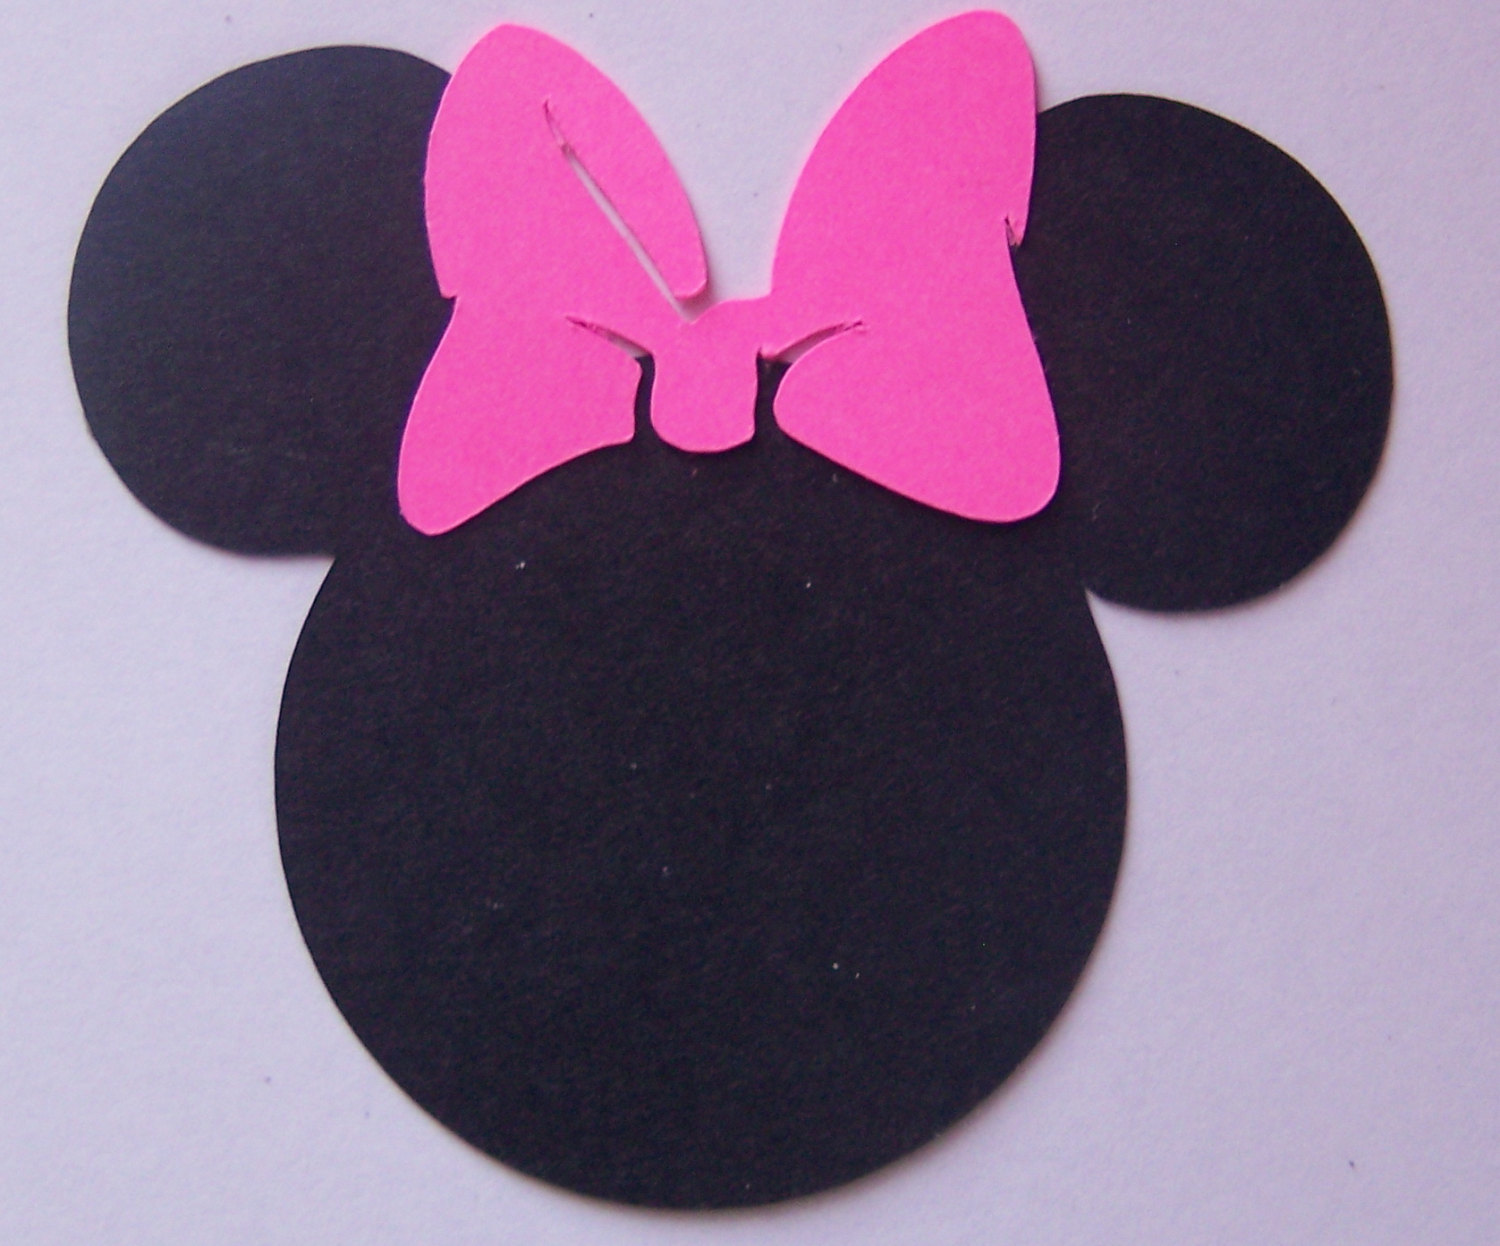 Popular items for minnie mouse head on Etsy